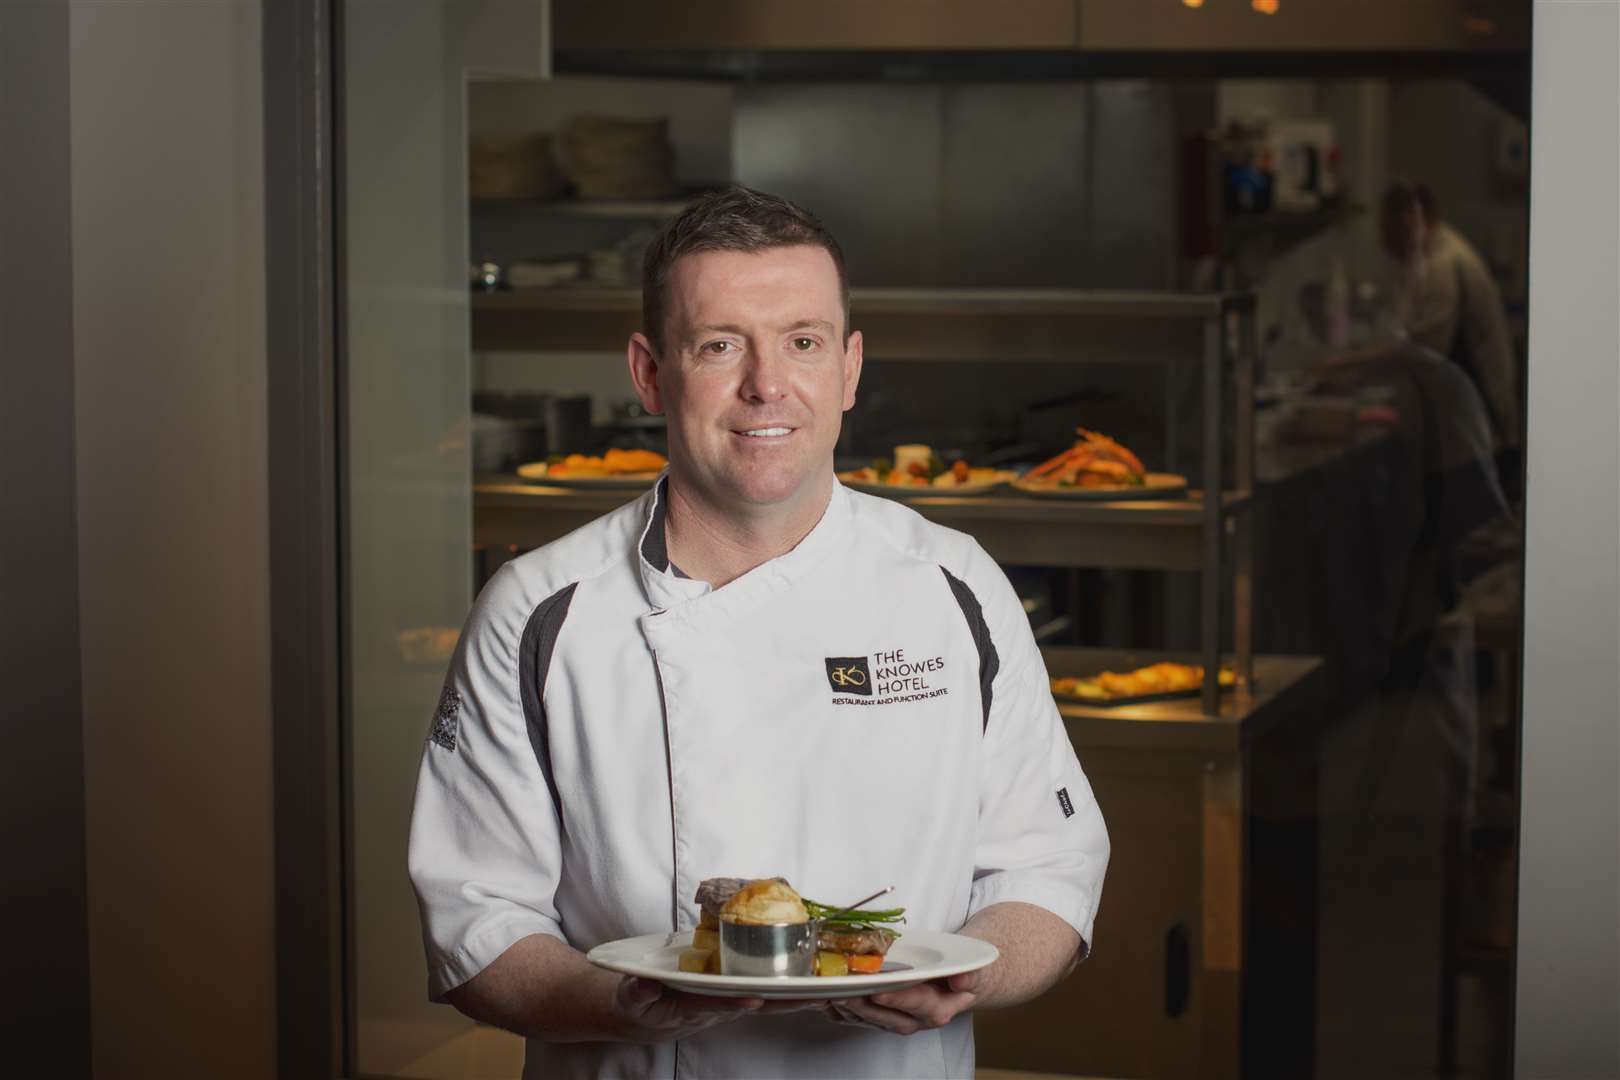 Wayne Stewart, owner and chef at the Knowes Hotel, Macduff.